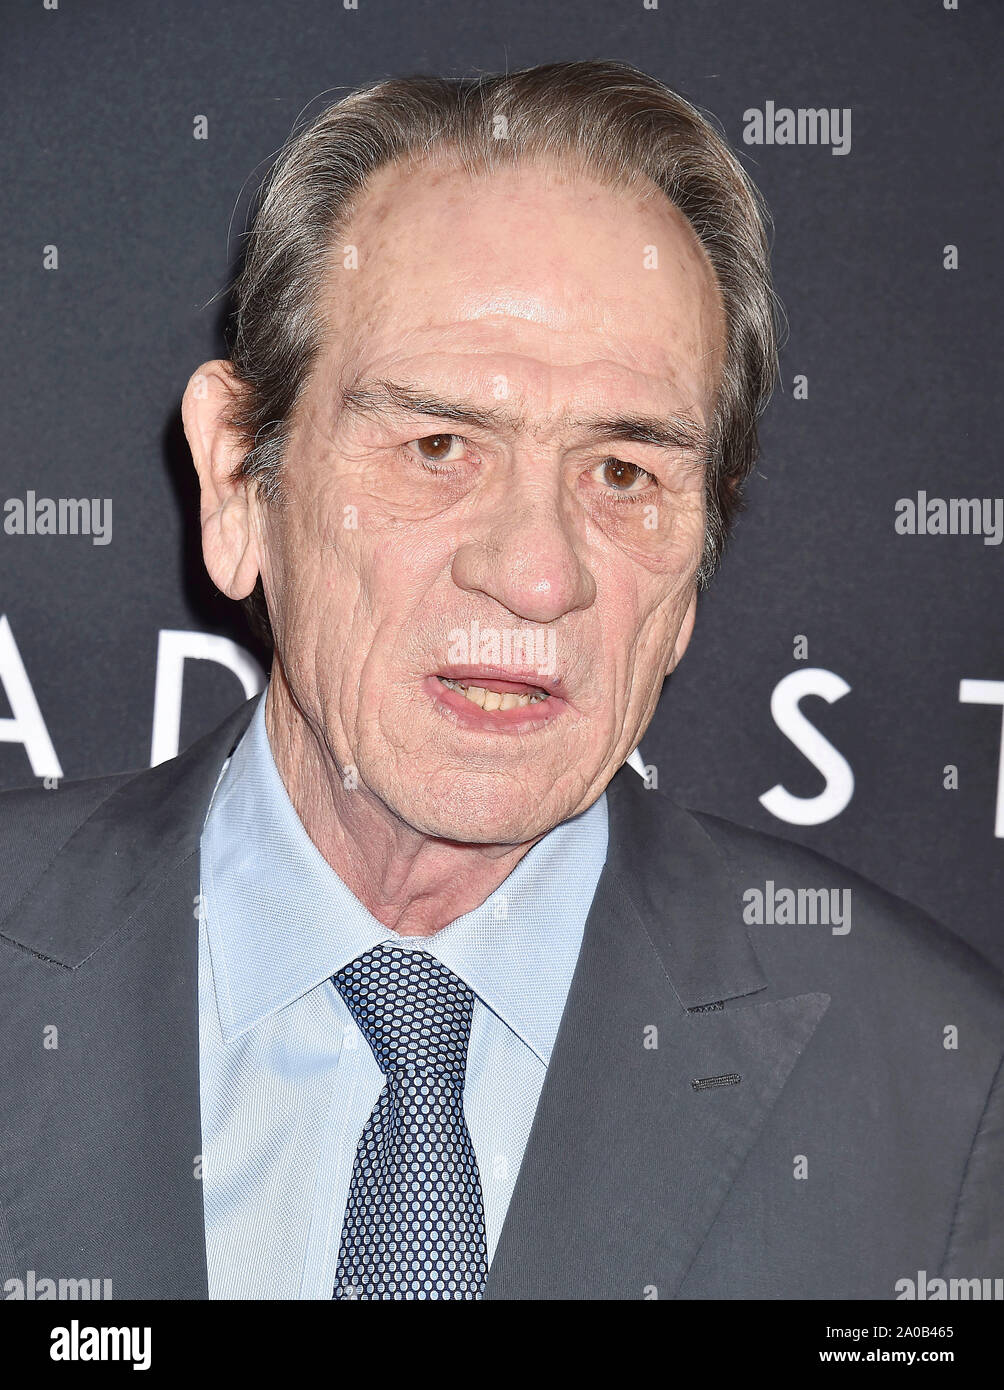 HOLLYWOOD, CA - SEPTEMBER 18: Tommy Lee Jones attends the premiere of 20th Century Fox's 'Ad Astra' at The Cinerama Dome on September 18, 2019 in Los Angeles, California. Stock Photo